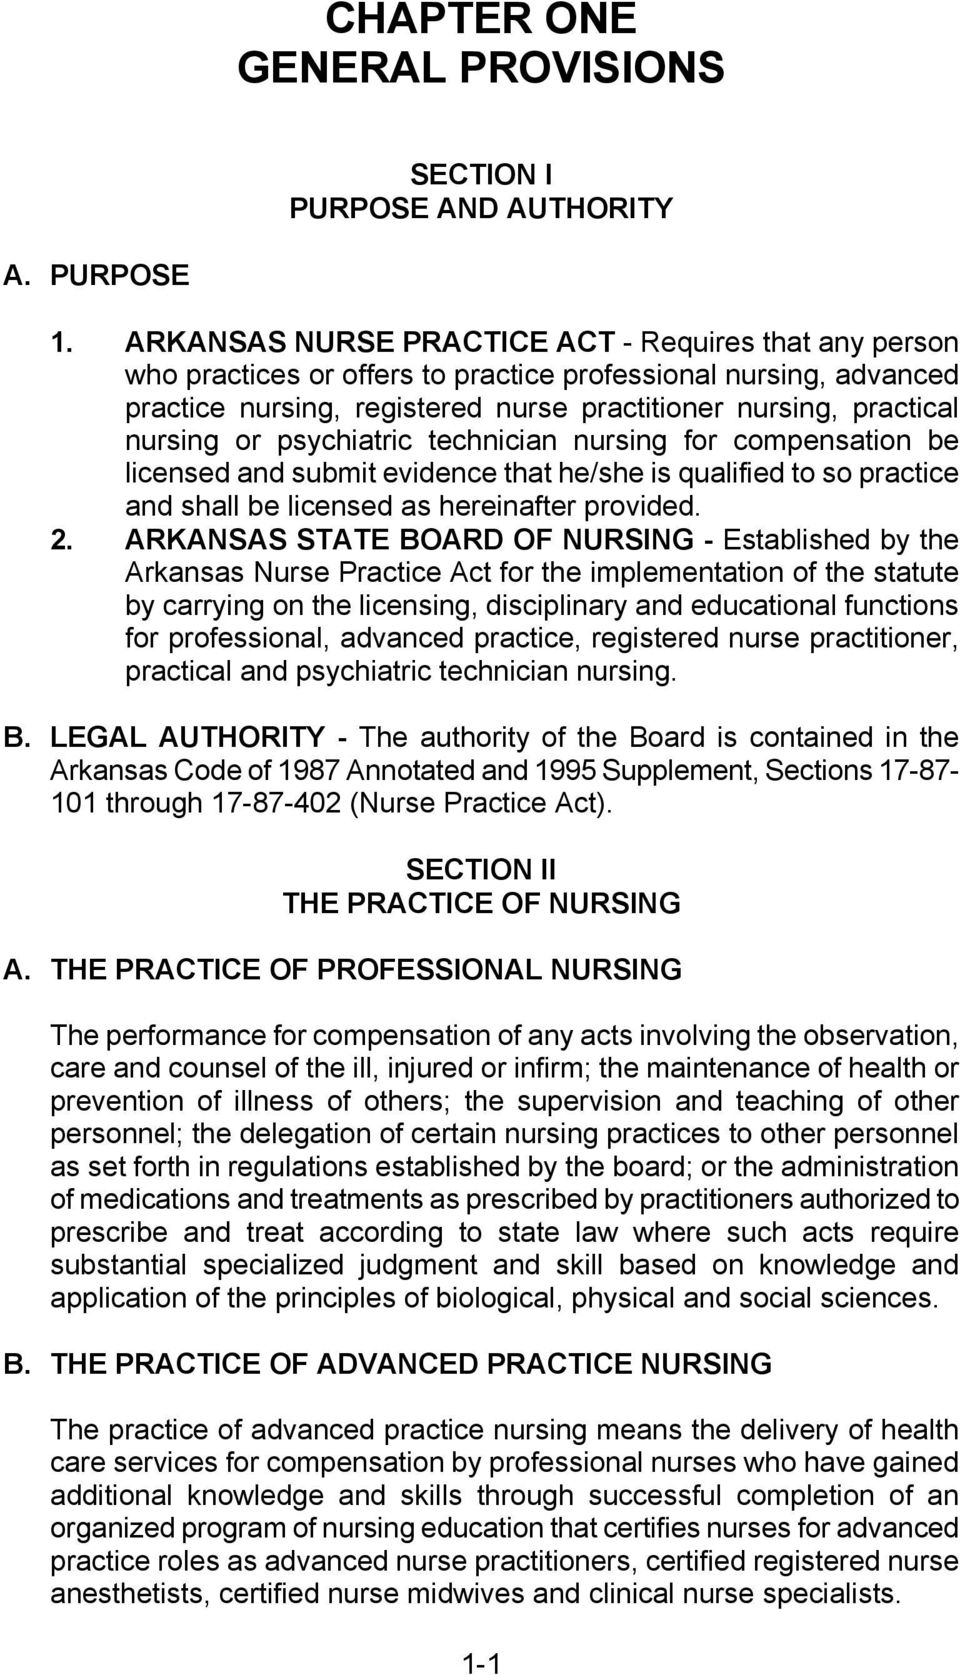 psychiatric technician nursing for compensation be licensed and submit evidence that he/she is qualified to so practice and shall be licensed as hereinafter provided. 2.